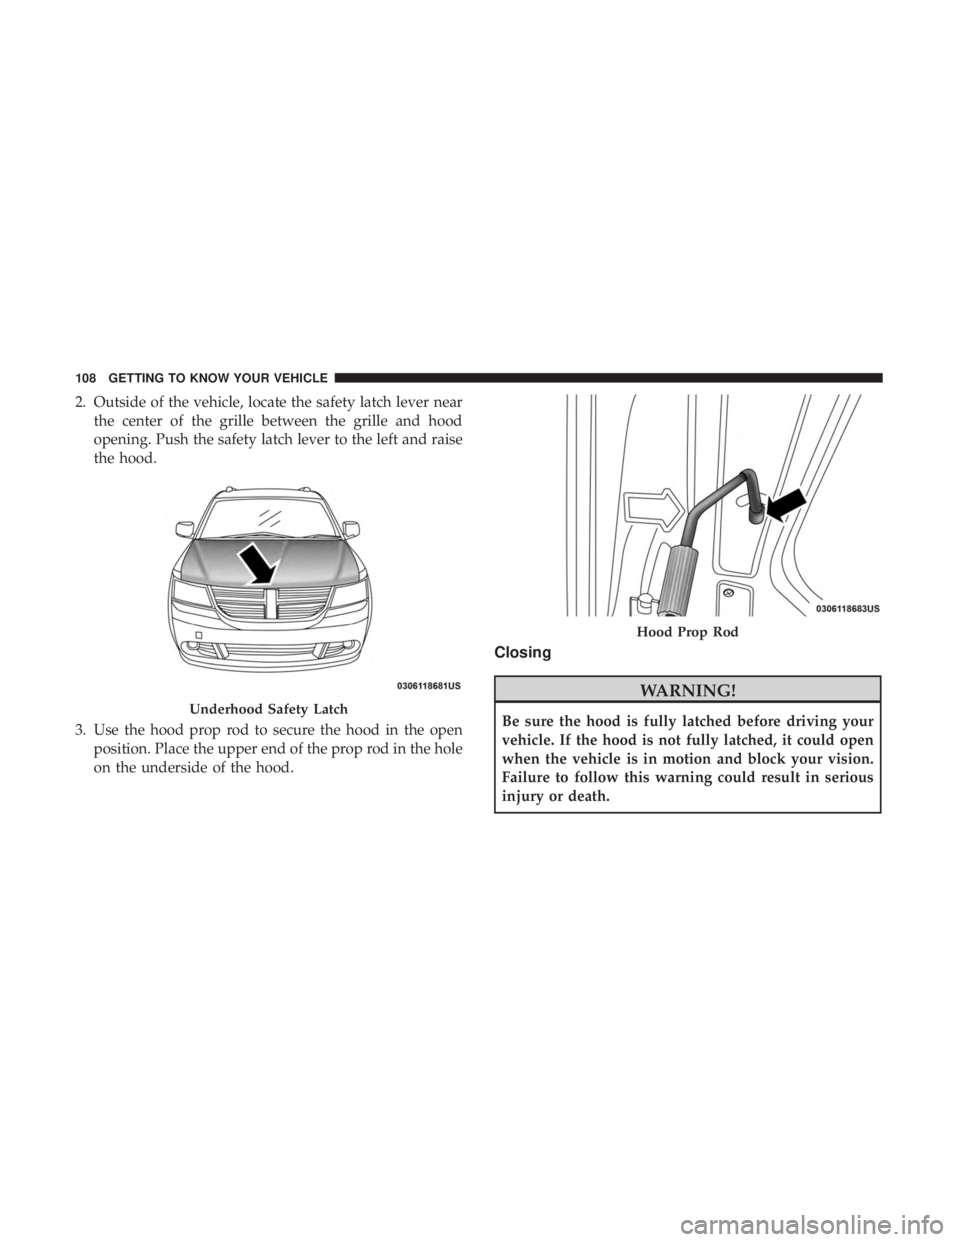 DODGE JOURNEY 2019  Owners Manual 2. Outside of the vehicle, locate the safety latch lever nearthe center of the grille between the grille and hood
opening. Push the safety latch lever to the left and raise
the hood.
3. Use the hood p